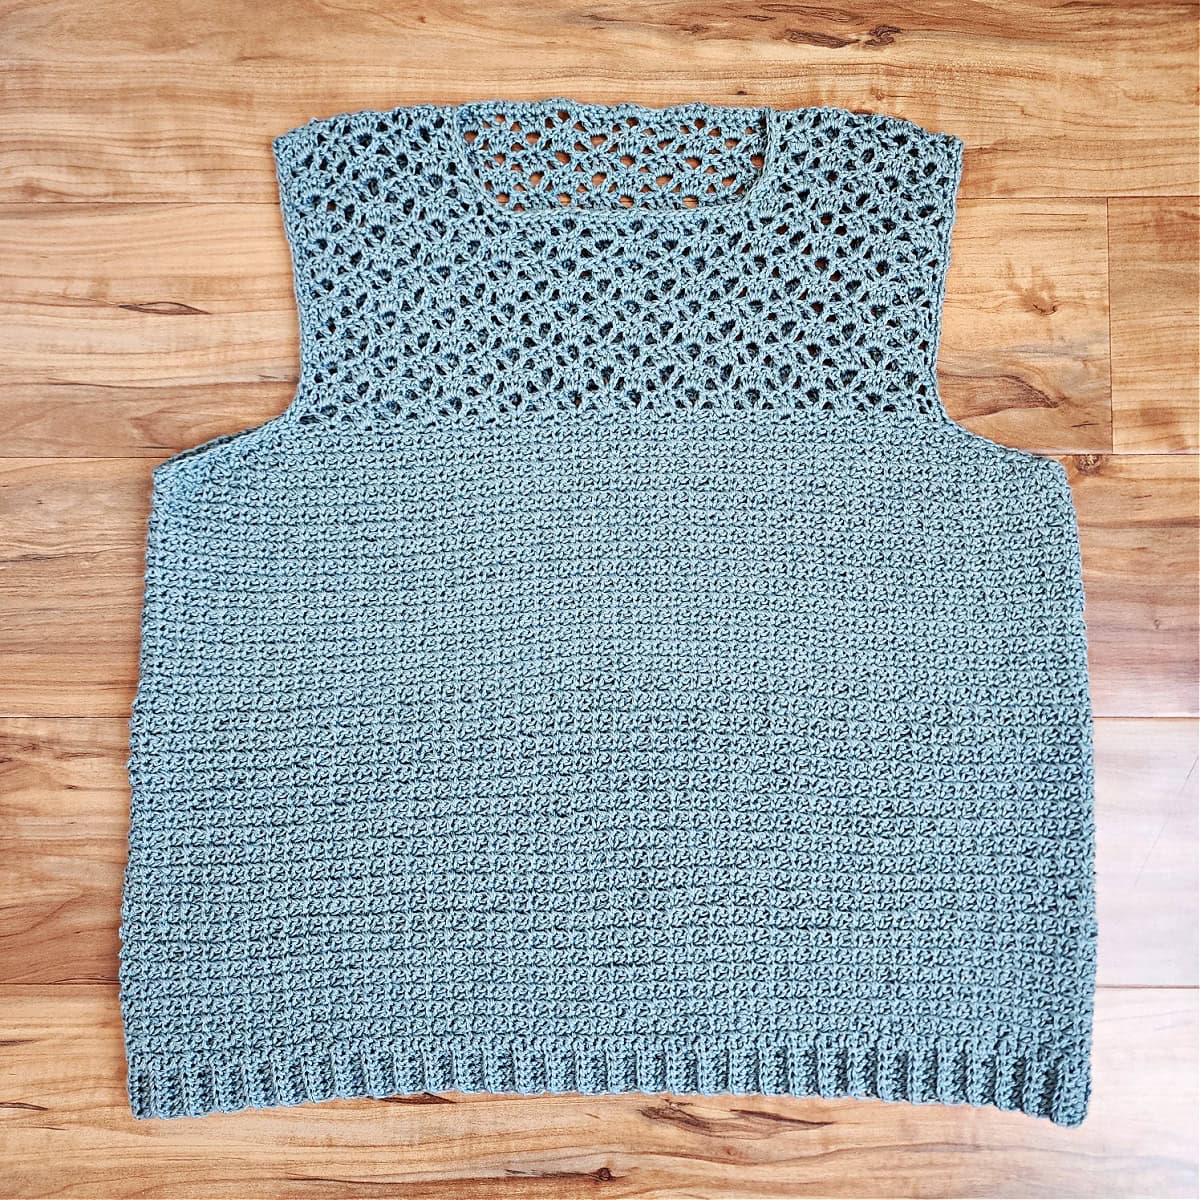 A completed crochet summer top laying on a wood floor.